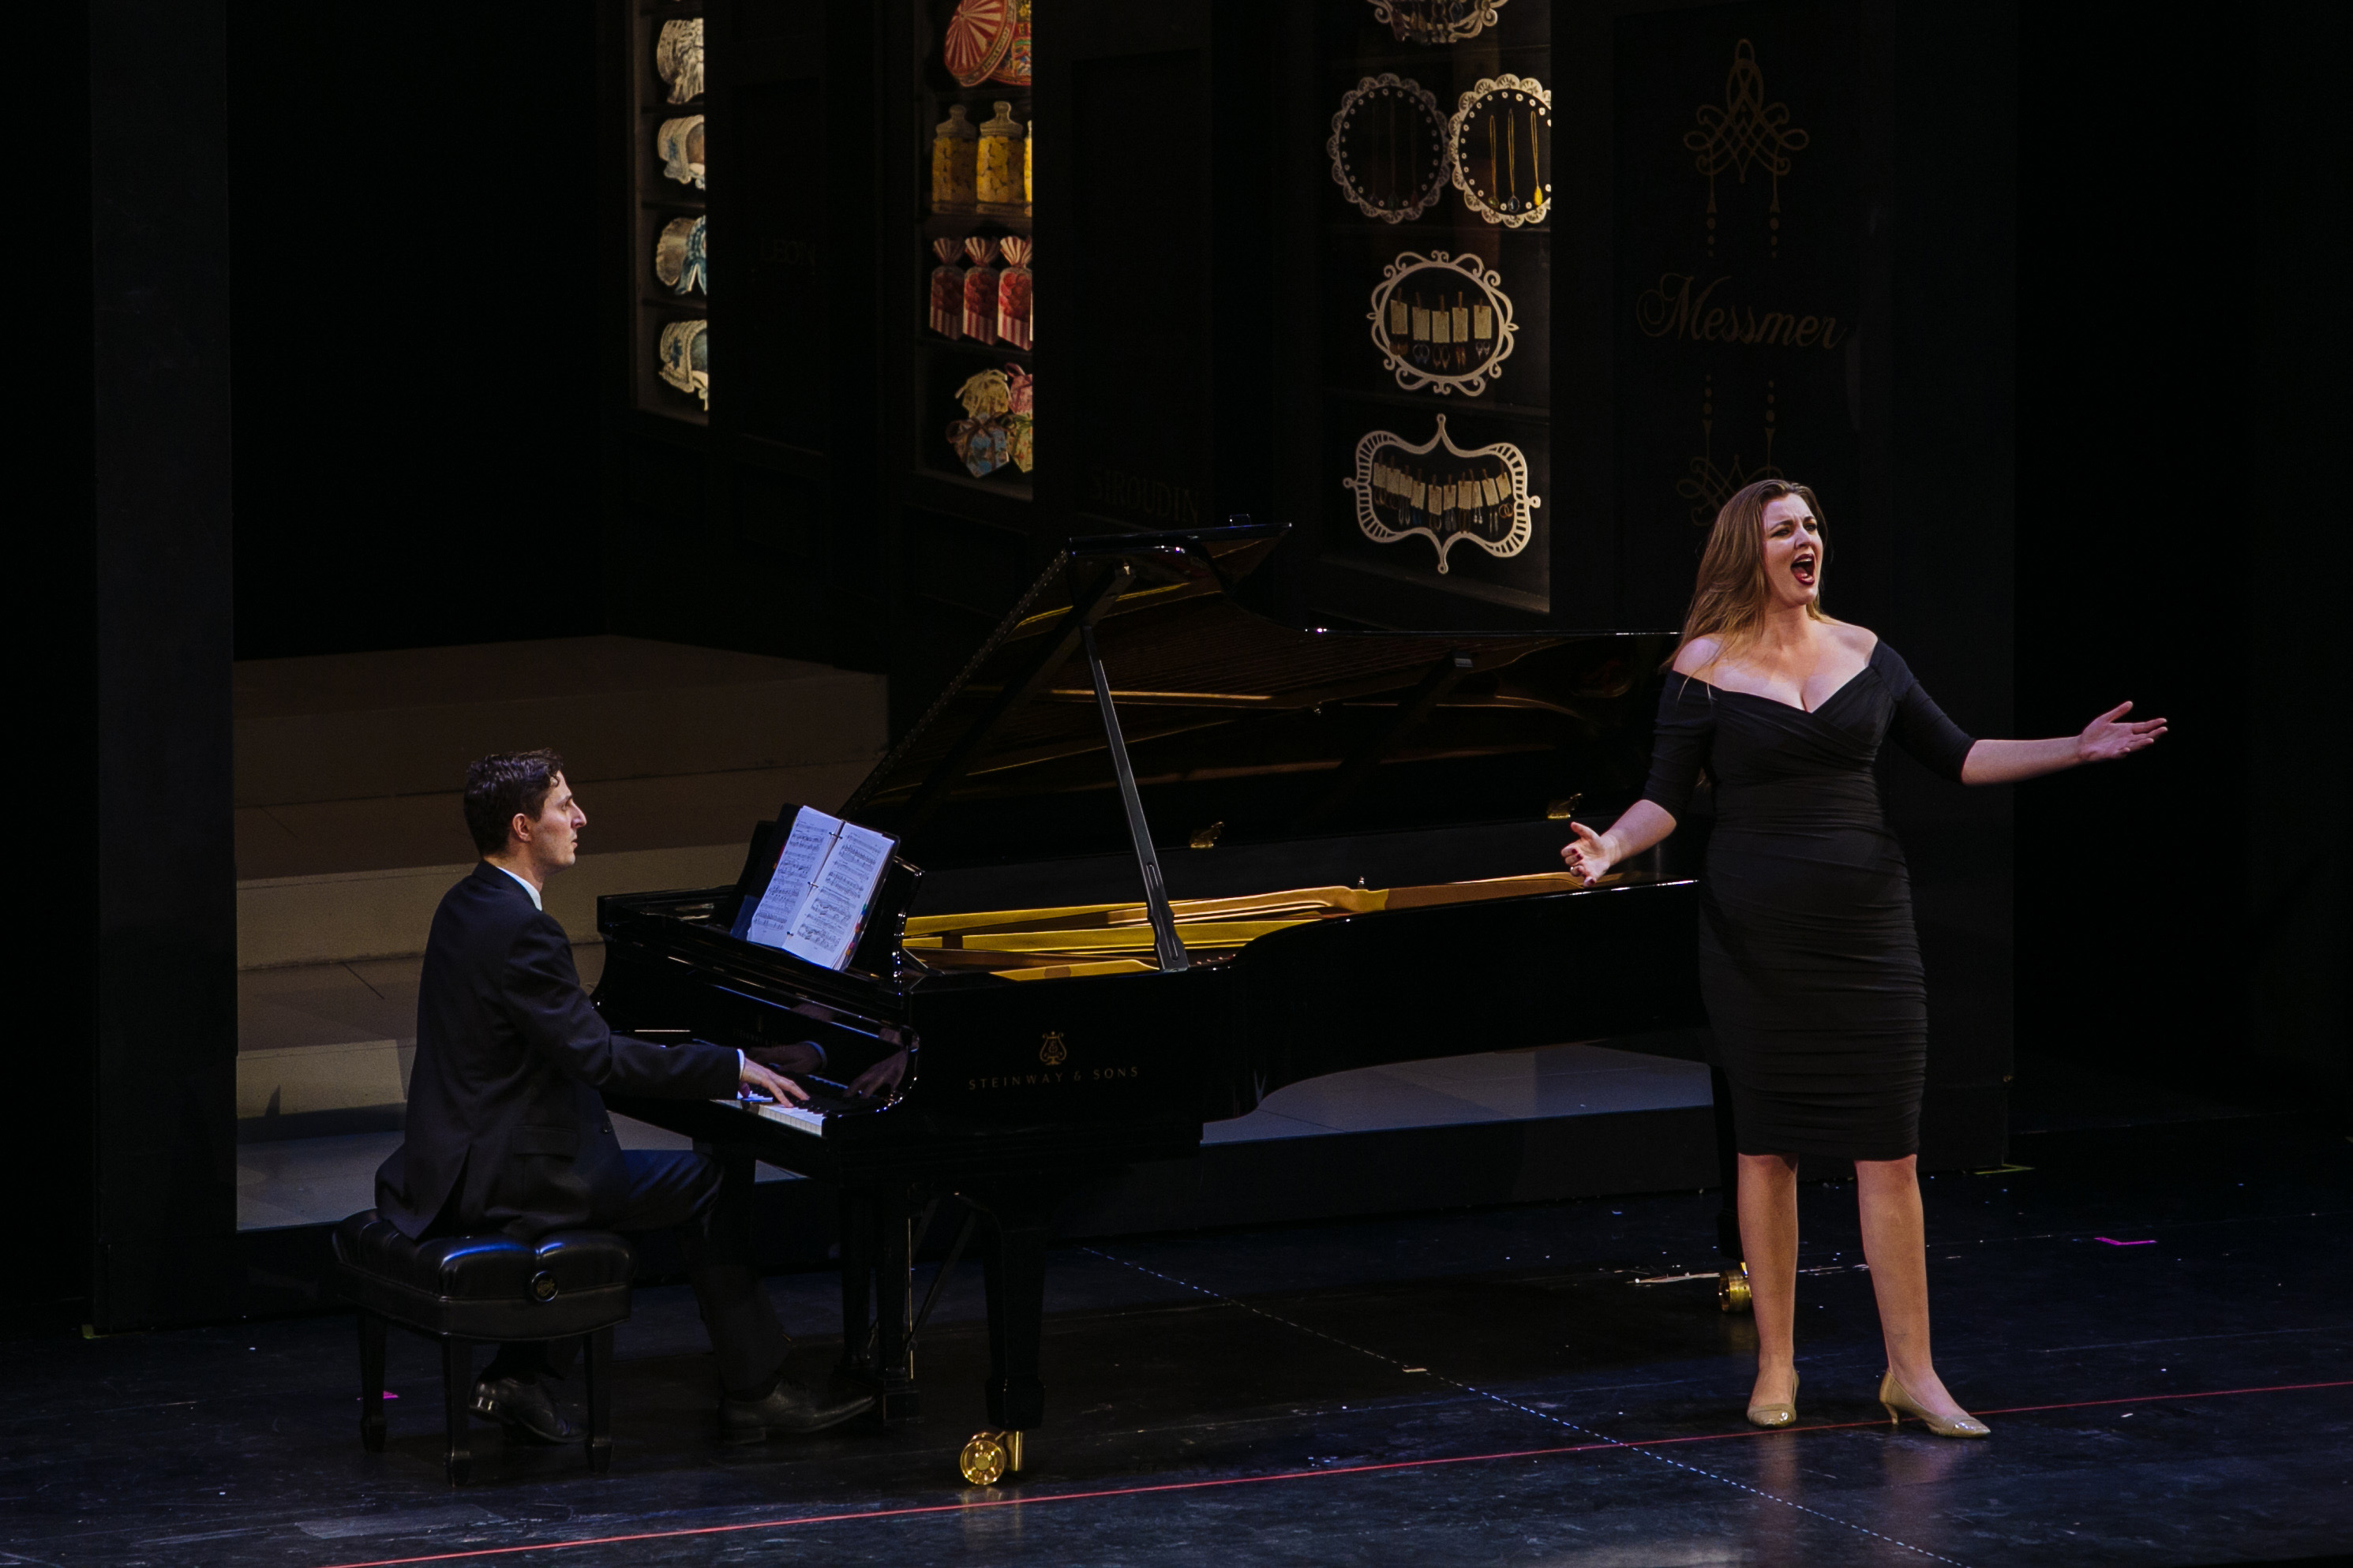 Kathleen Felty in her final audition on the Chicago Lyric Opera stage, 2018